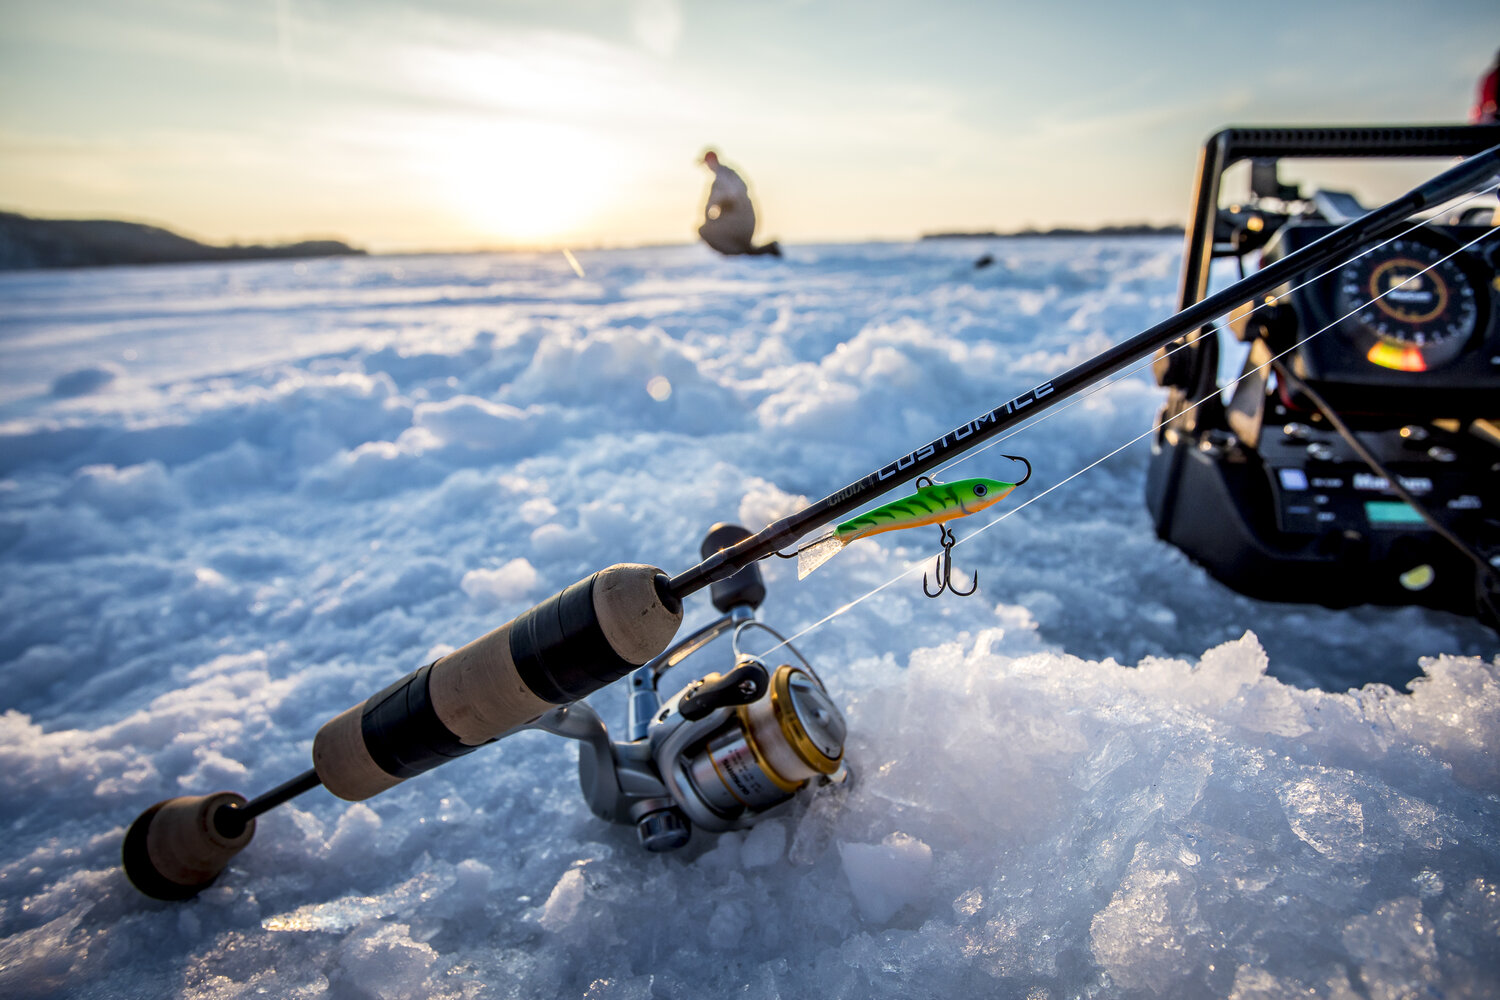 The combination of the St. Croix CCI Search Bait Rod and this reel makes for a dynamite Jigging Rap/Walleye setup! - Photograph by Matt Addington